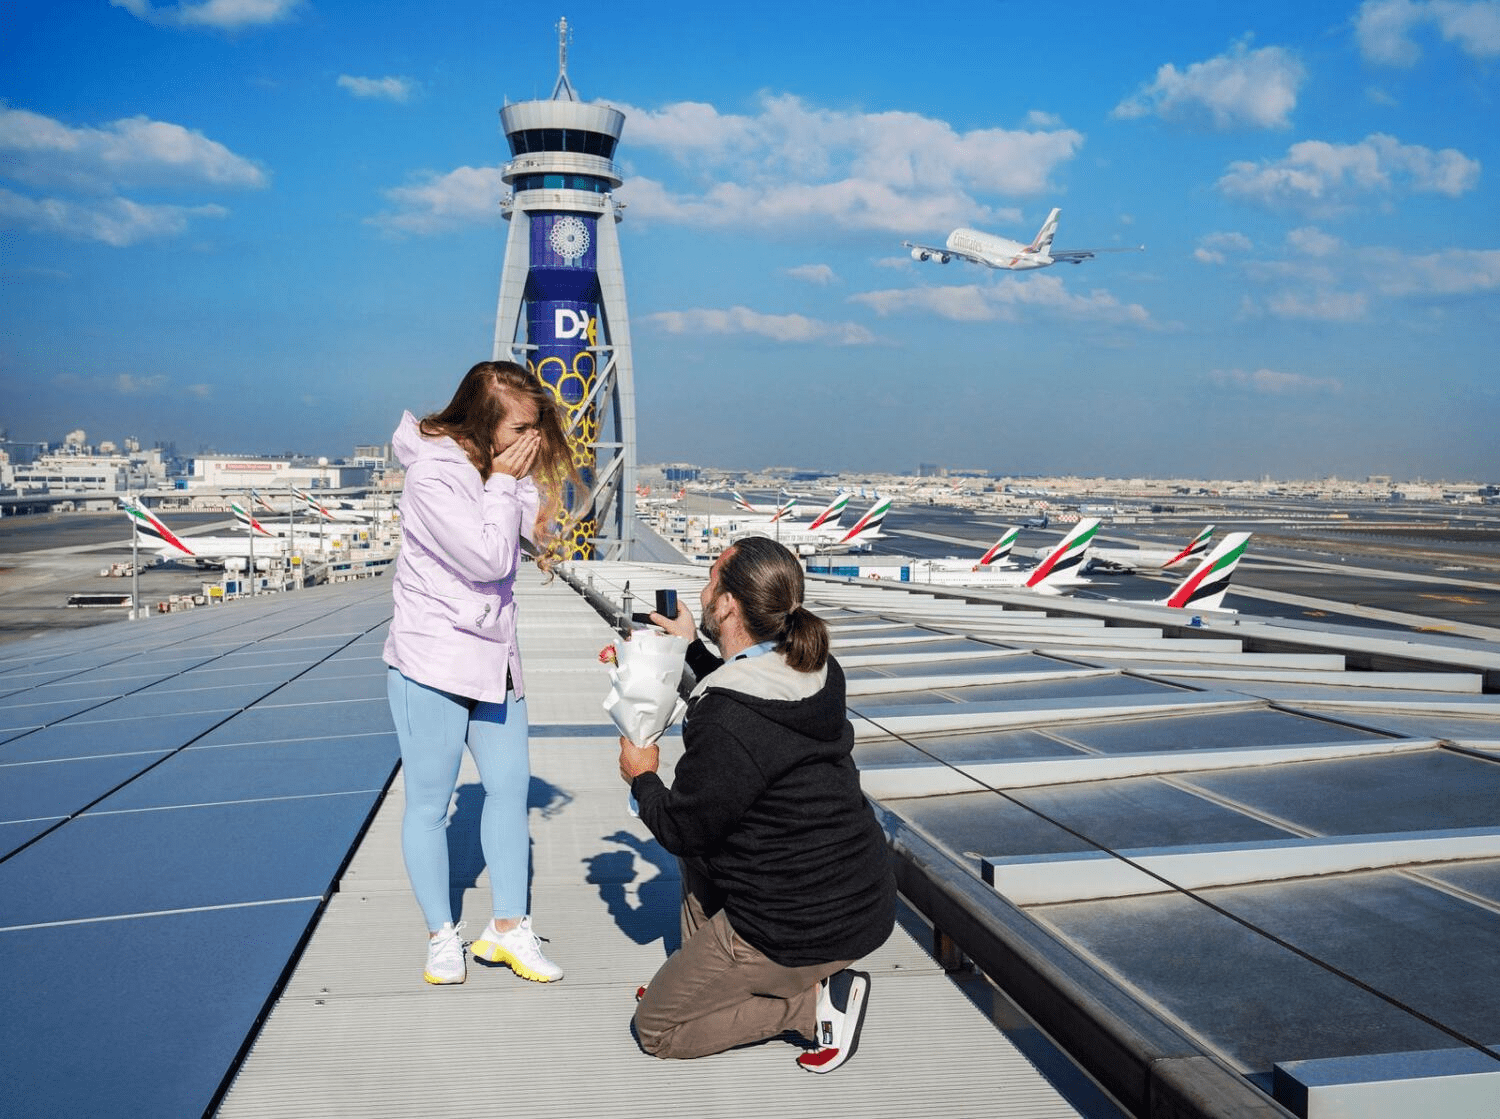 Romantic Valentine’s Day Proposal Soars to New Heights at Dubai Airport Rooftop